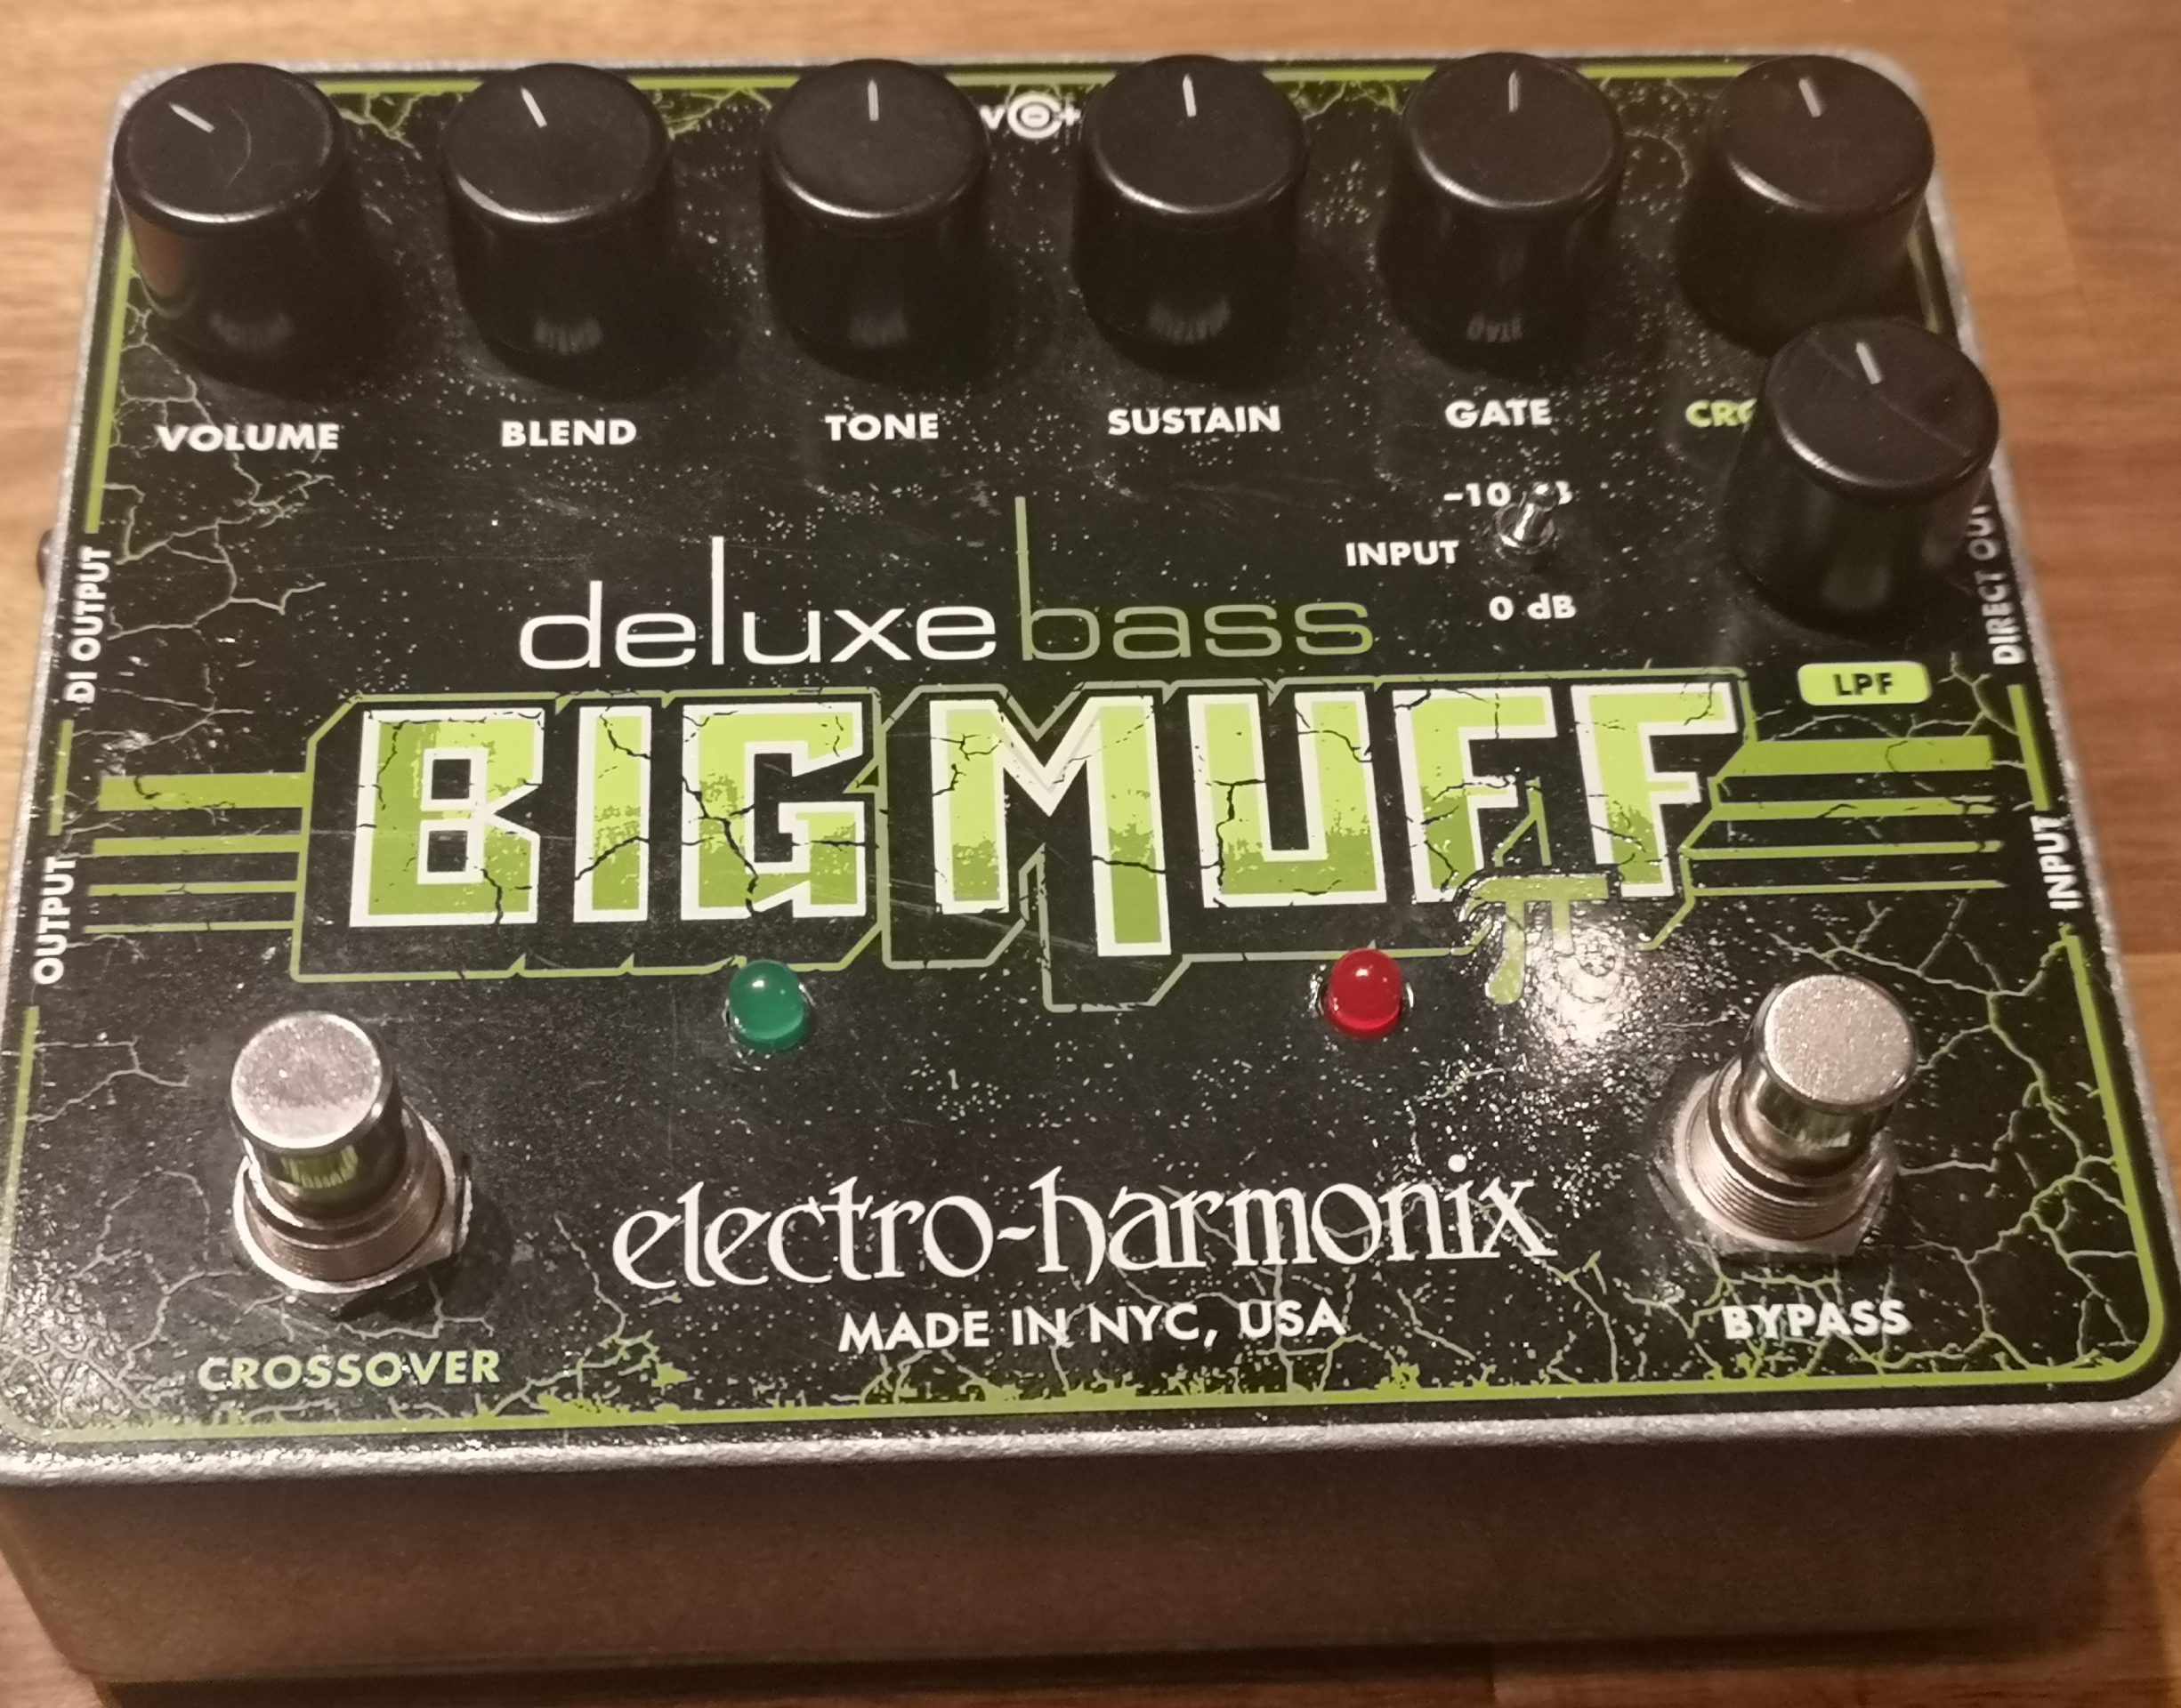 electro-harmonix Deluxe Bass Big Muff Pi - Effects Pedals